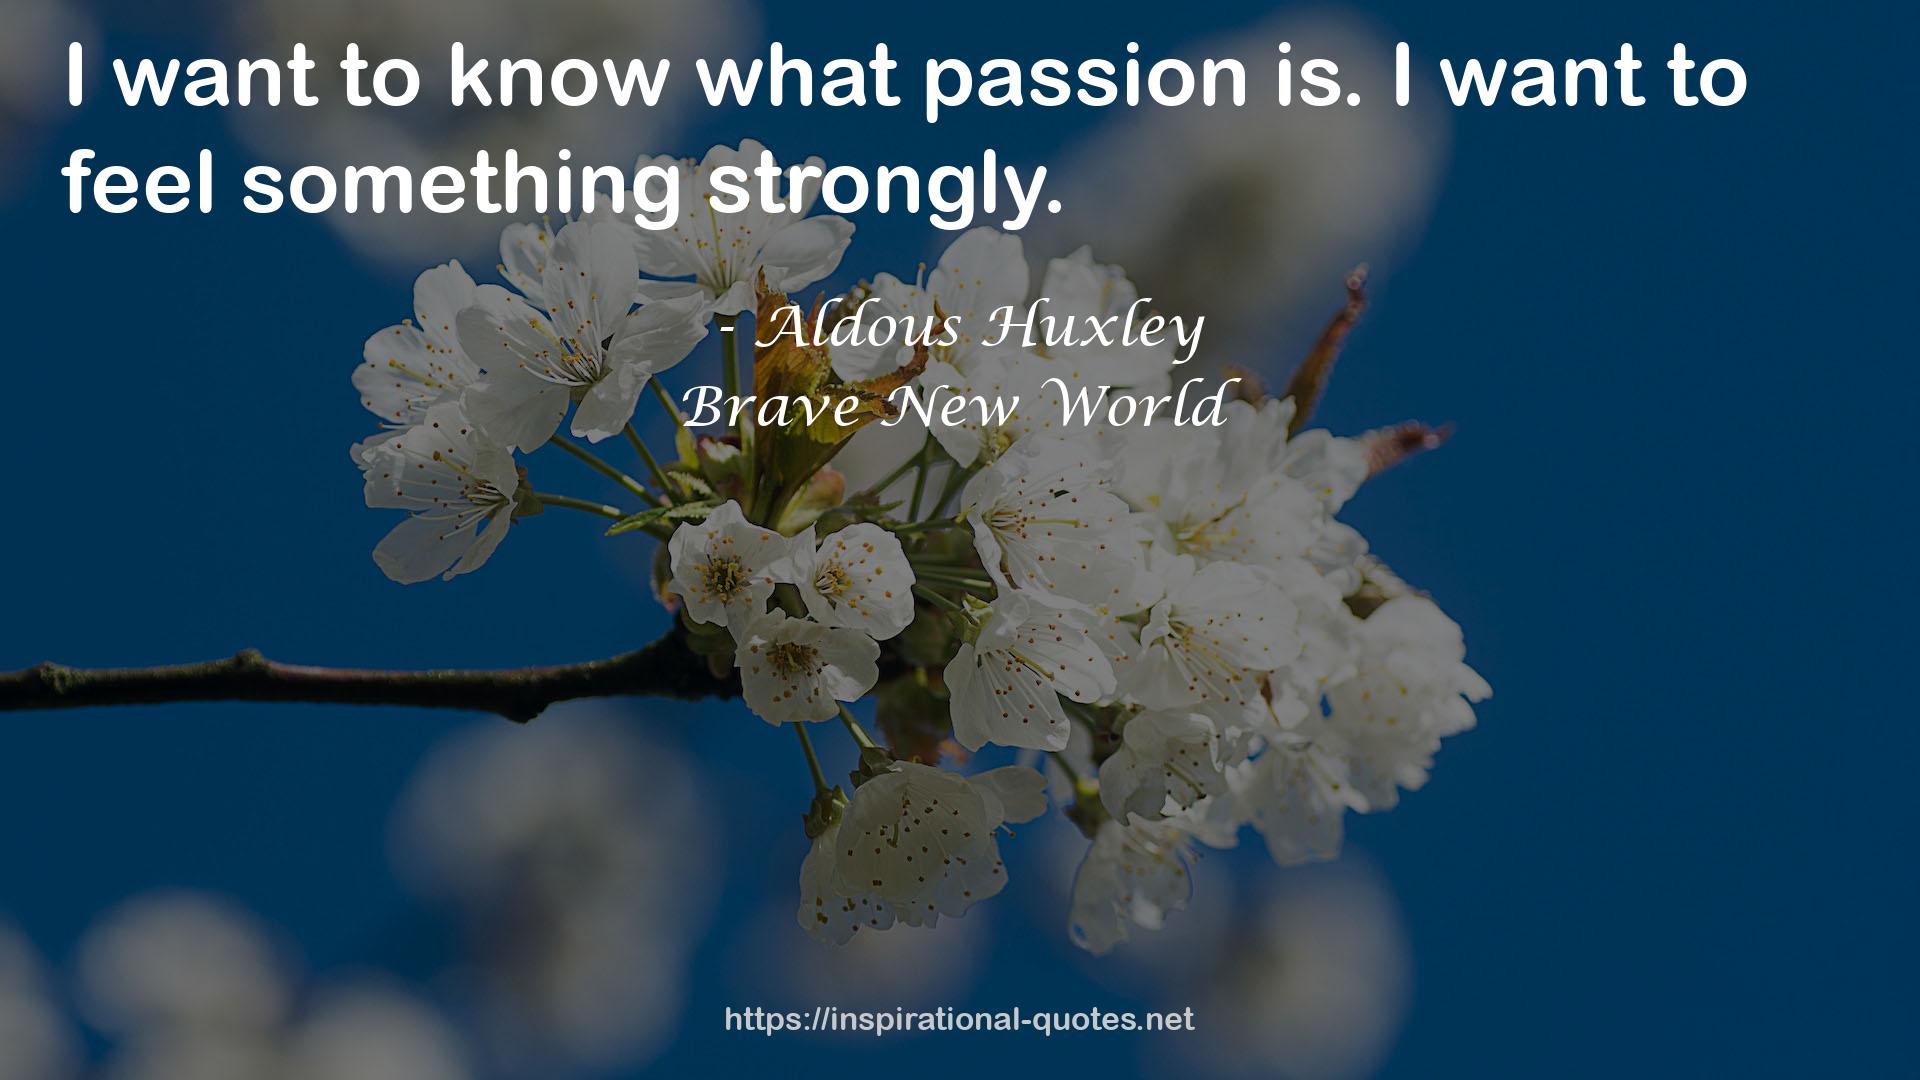 what passion  QUOTES